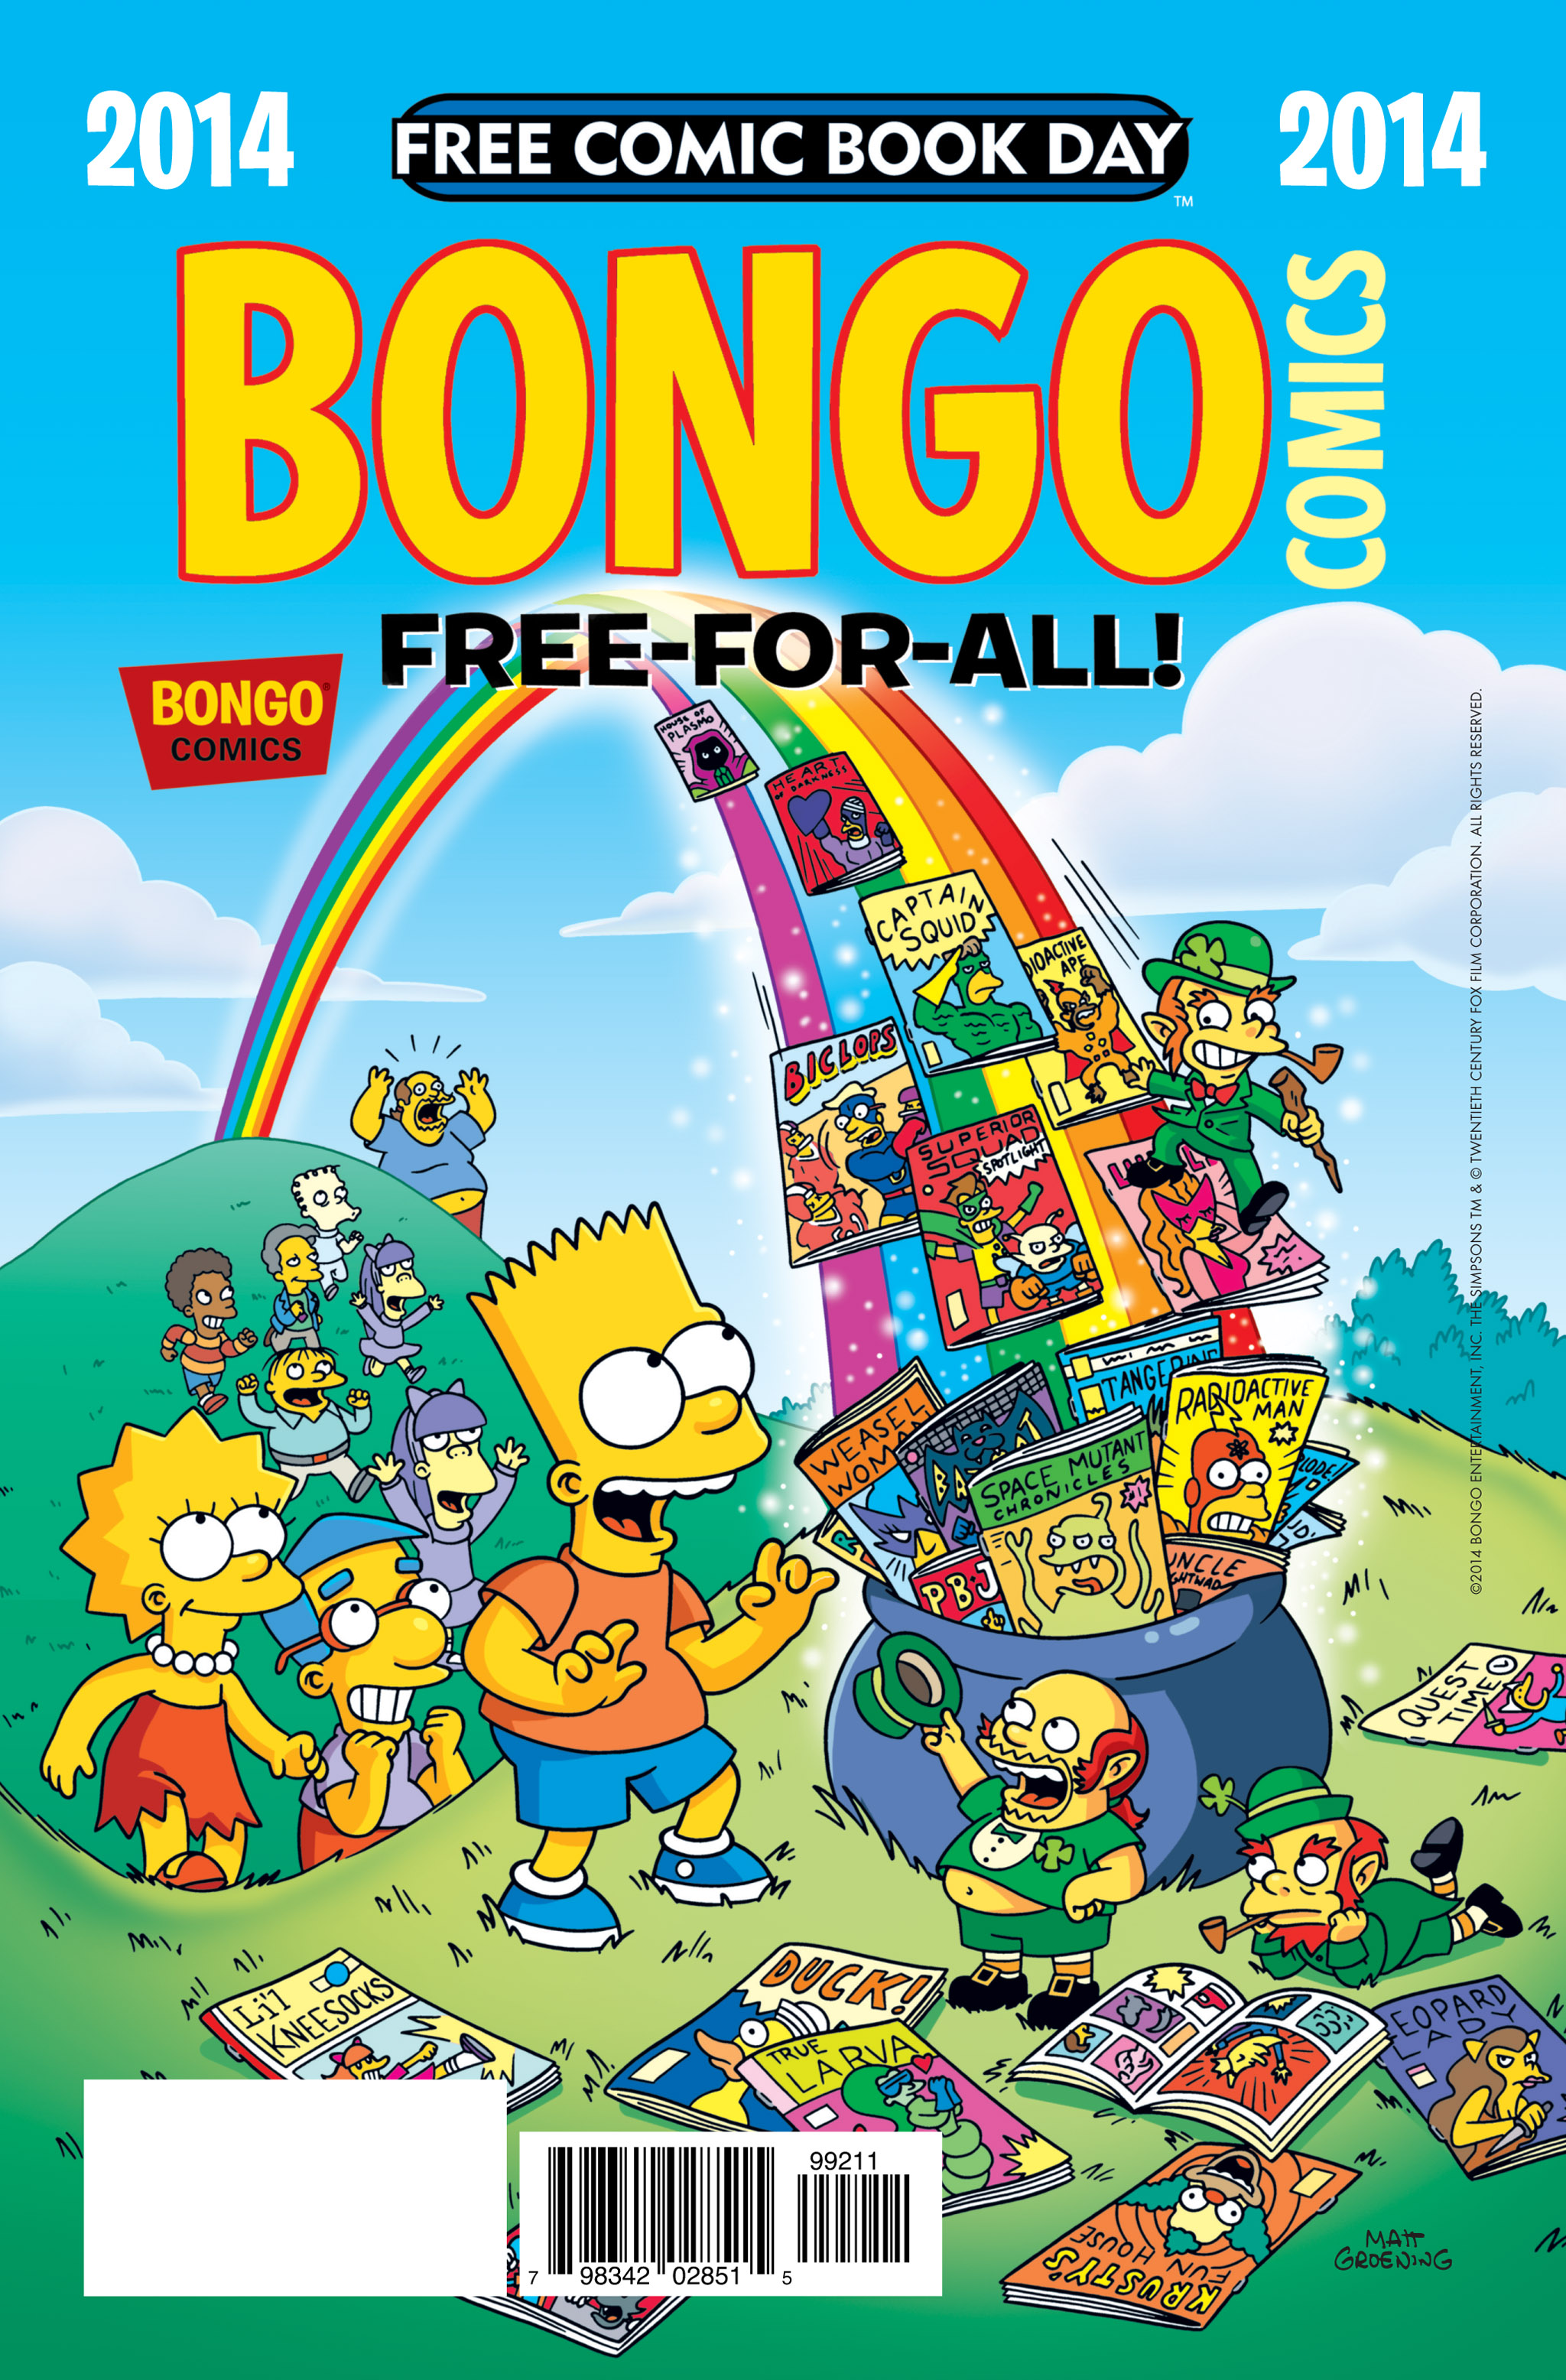 Read online Free Comic Book Day 2014 comic -  Issue # Bongo Comics Free-For-All - 1